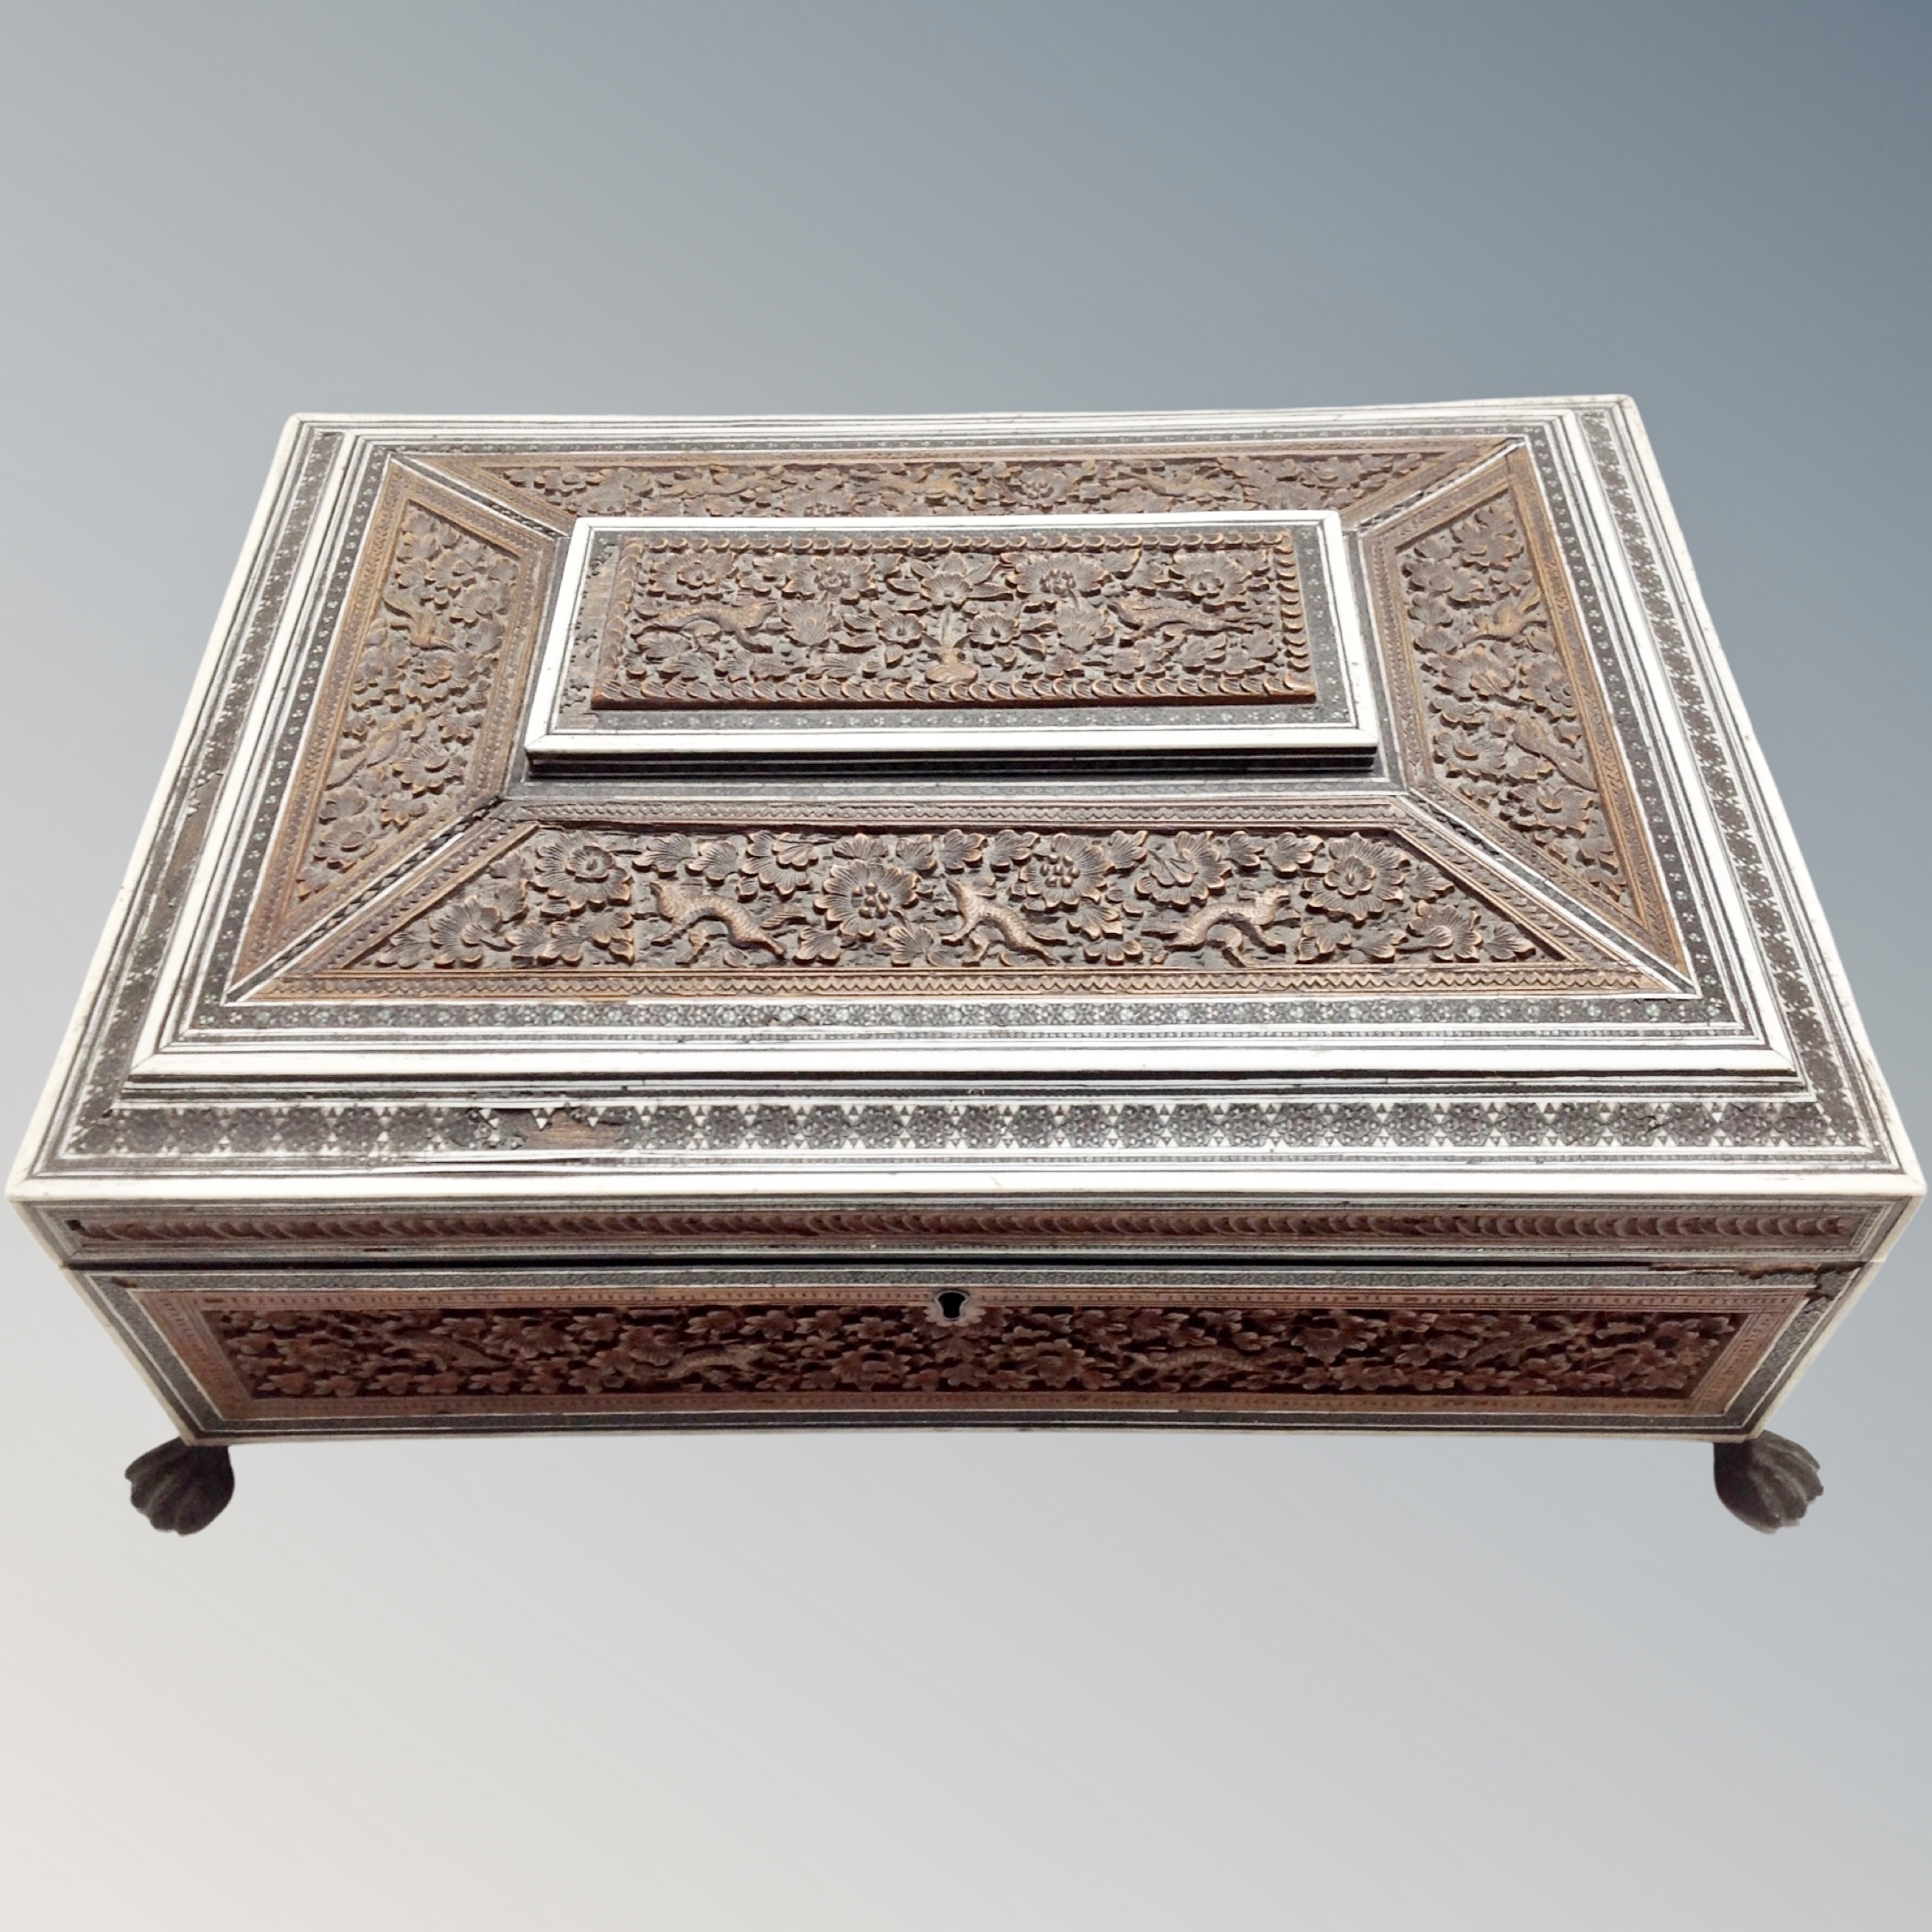 A 19th century Anglo-Indian Vizagapatam carved sandalwood and bone-inlaid work box on paw feet